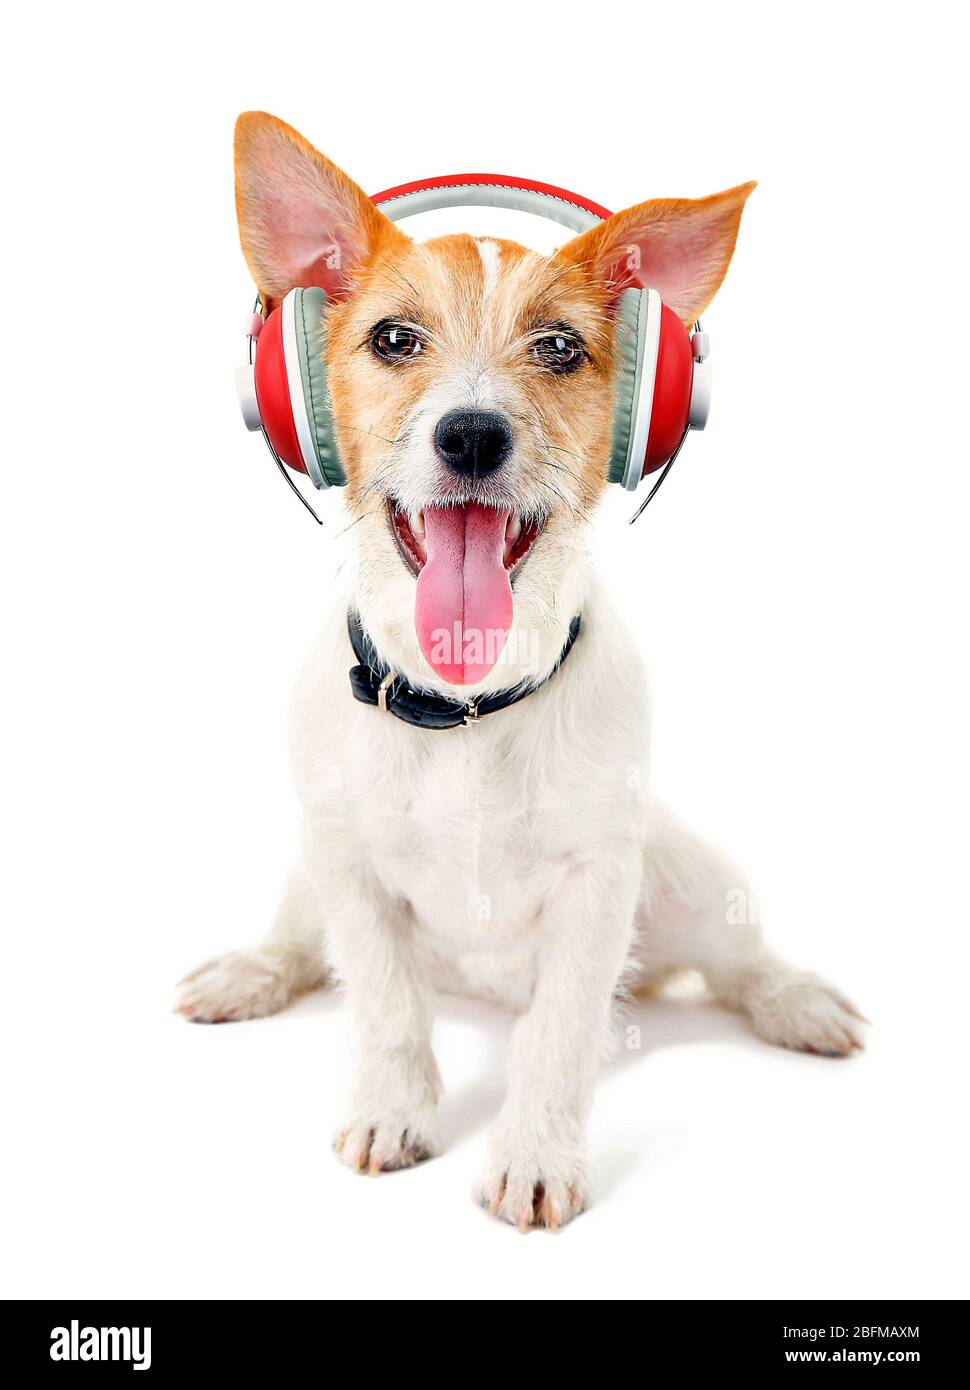 Cute dog with headphones isolated on white Stock Photo